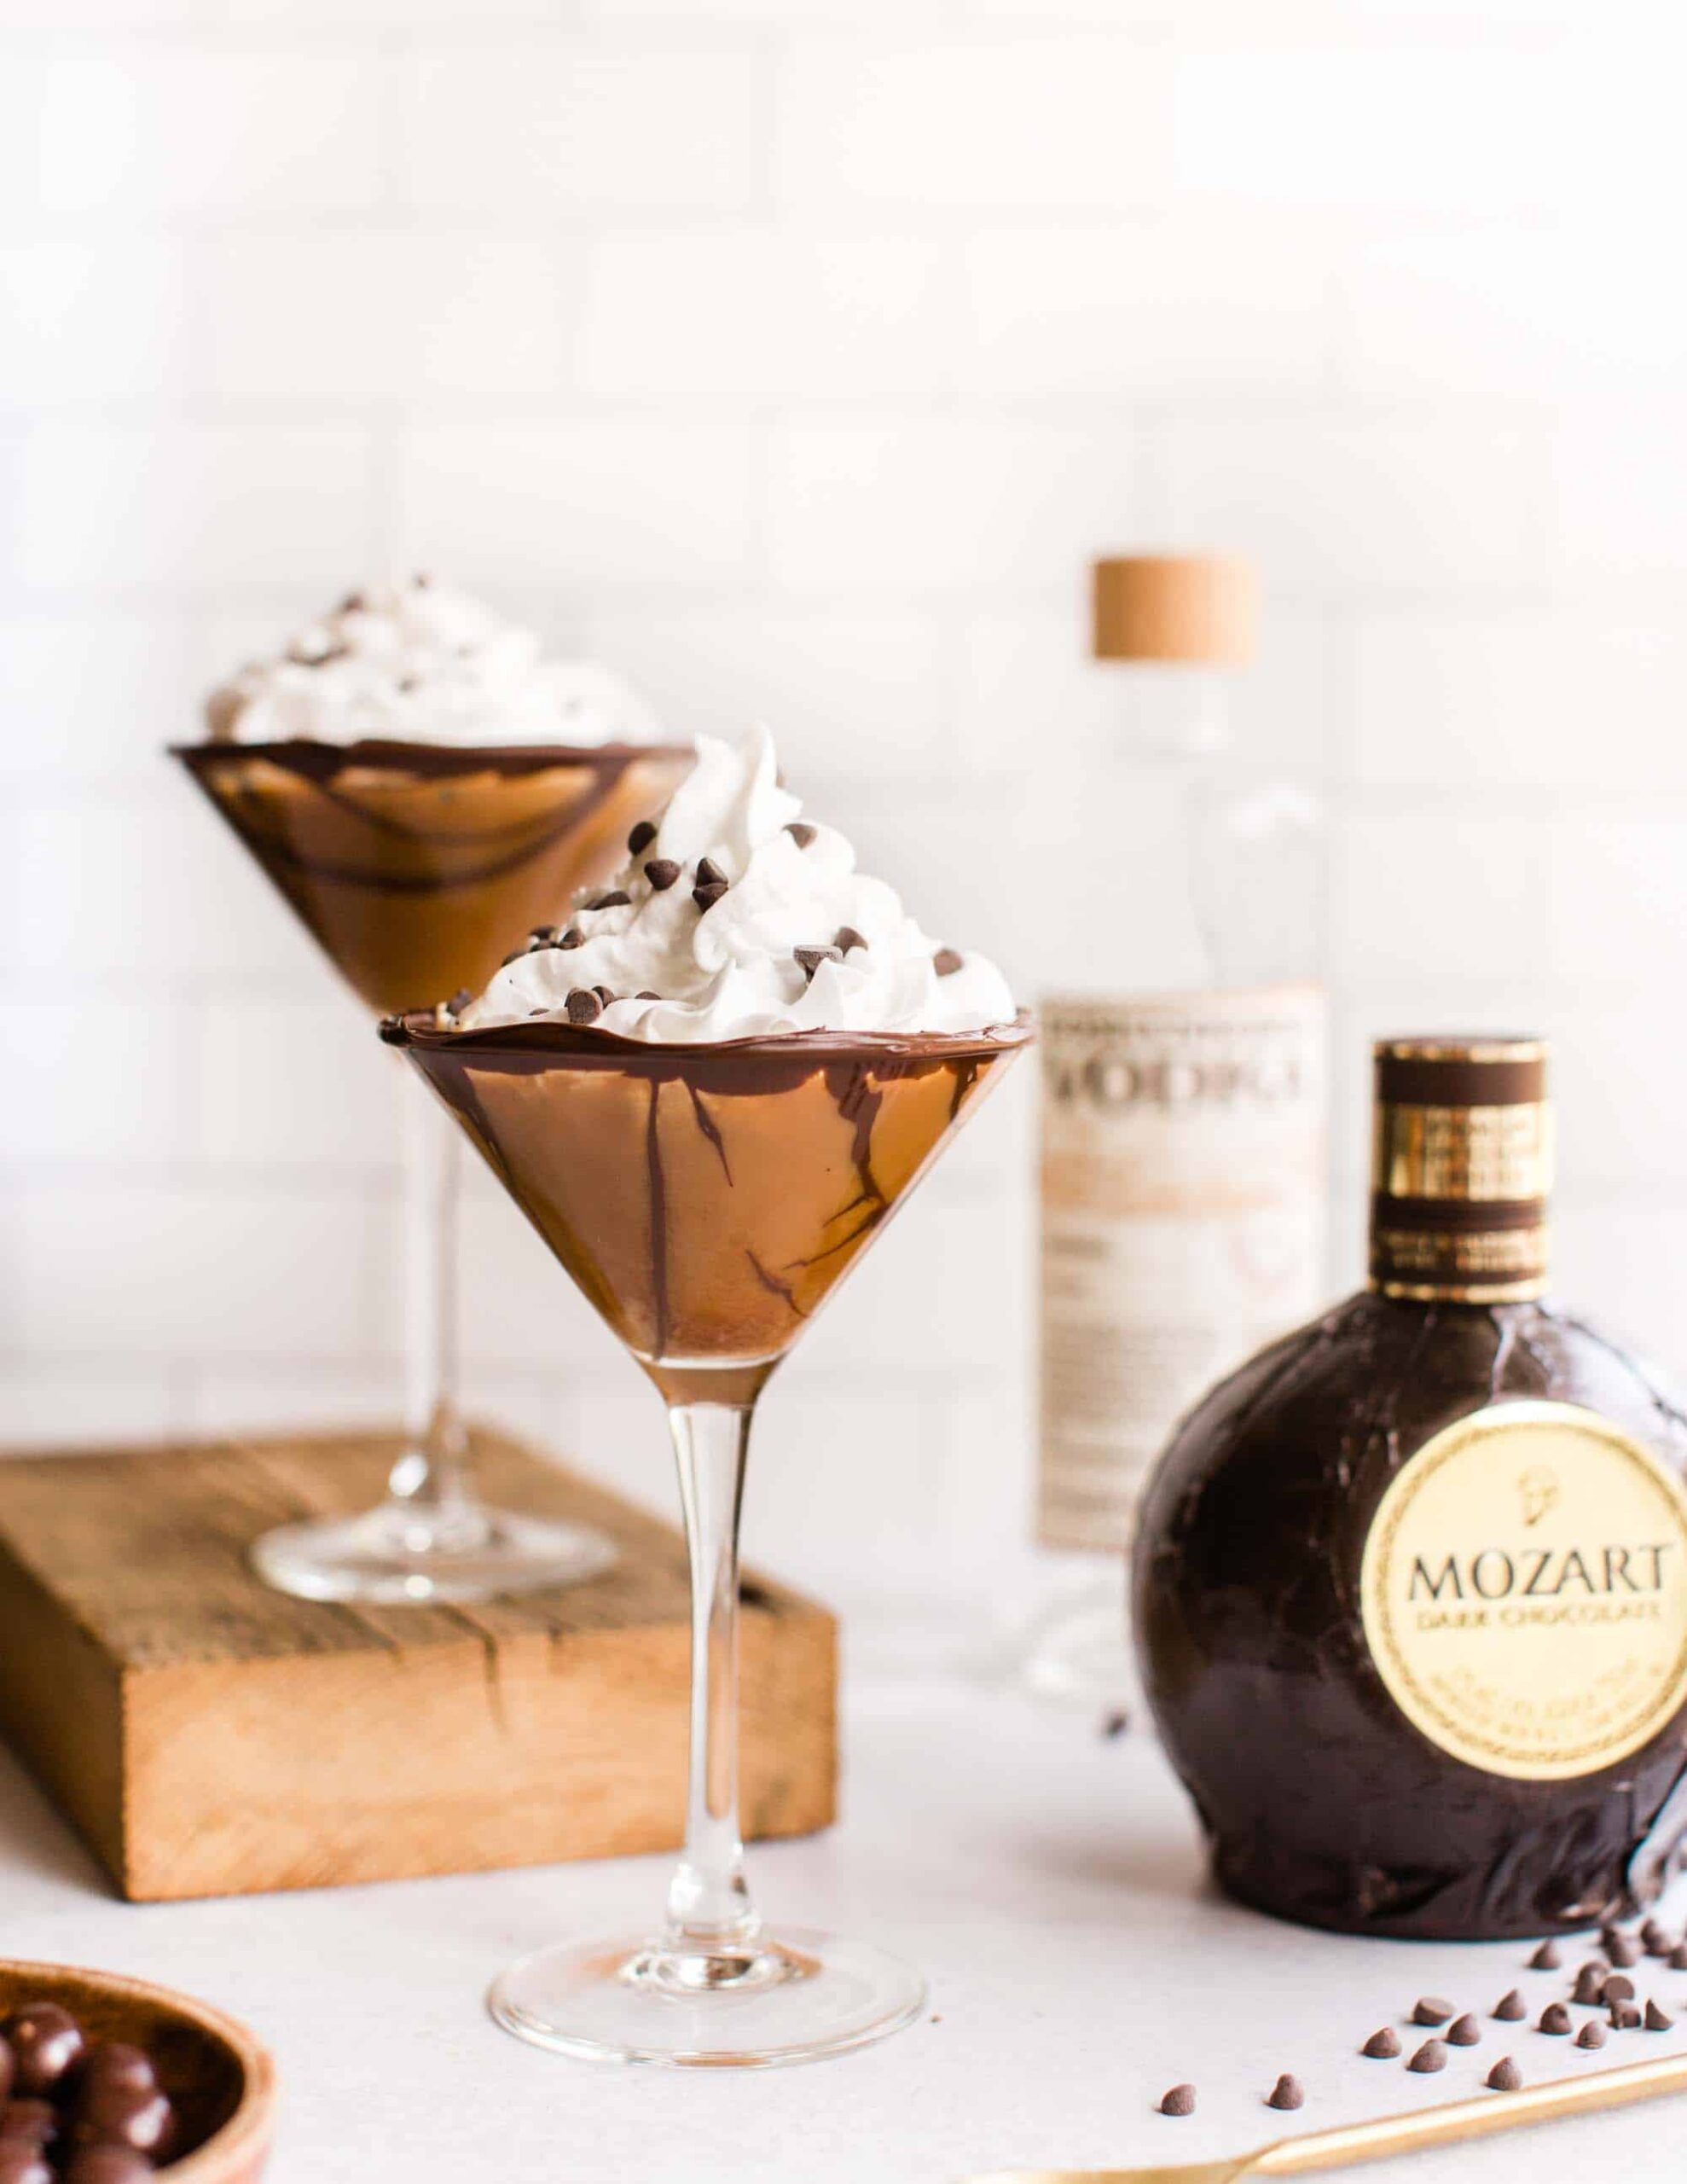 Festive Vegan Chocolate Martini Holiday Cocktail with Vodka and Chocolate Liqueur